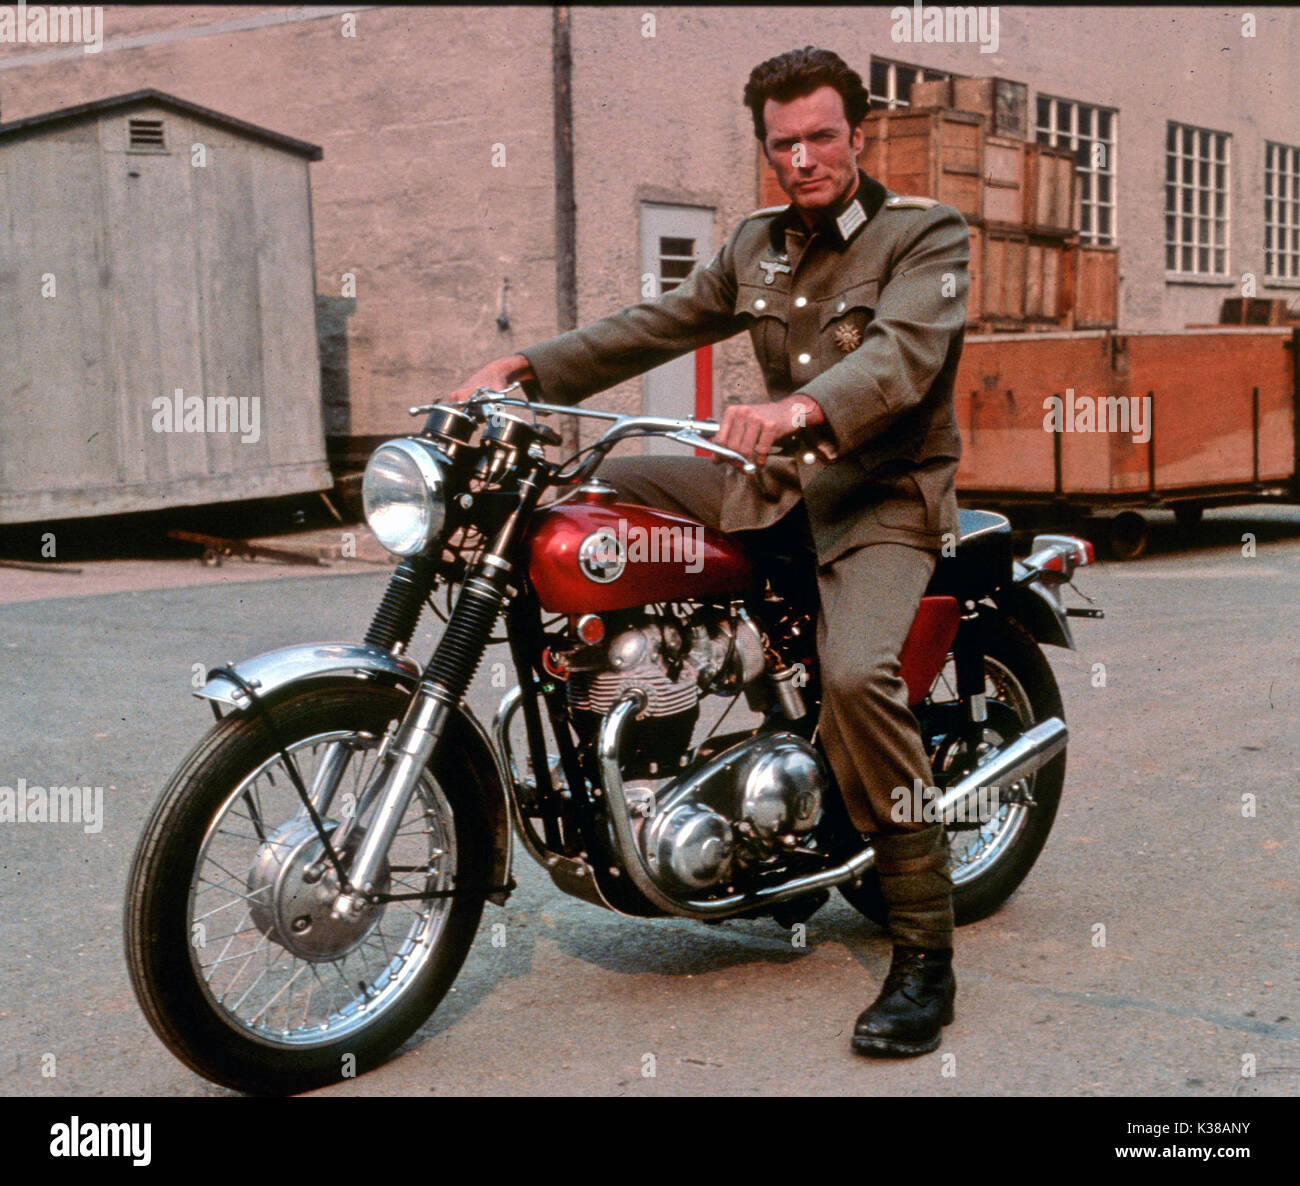 WHERE EAGLES DARE MGM CLINT EASTWOOD MOTORCYCLE 1960s : NORTON PICTURE FROM  THE RONALD GRANT ARCHIVE WHERE EAGLES DARE MGM CLINT EASTWOOD MOTORCYCLE  1960s : NORTON Date: 1968 Stock Photo - Alamy